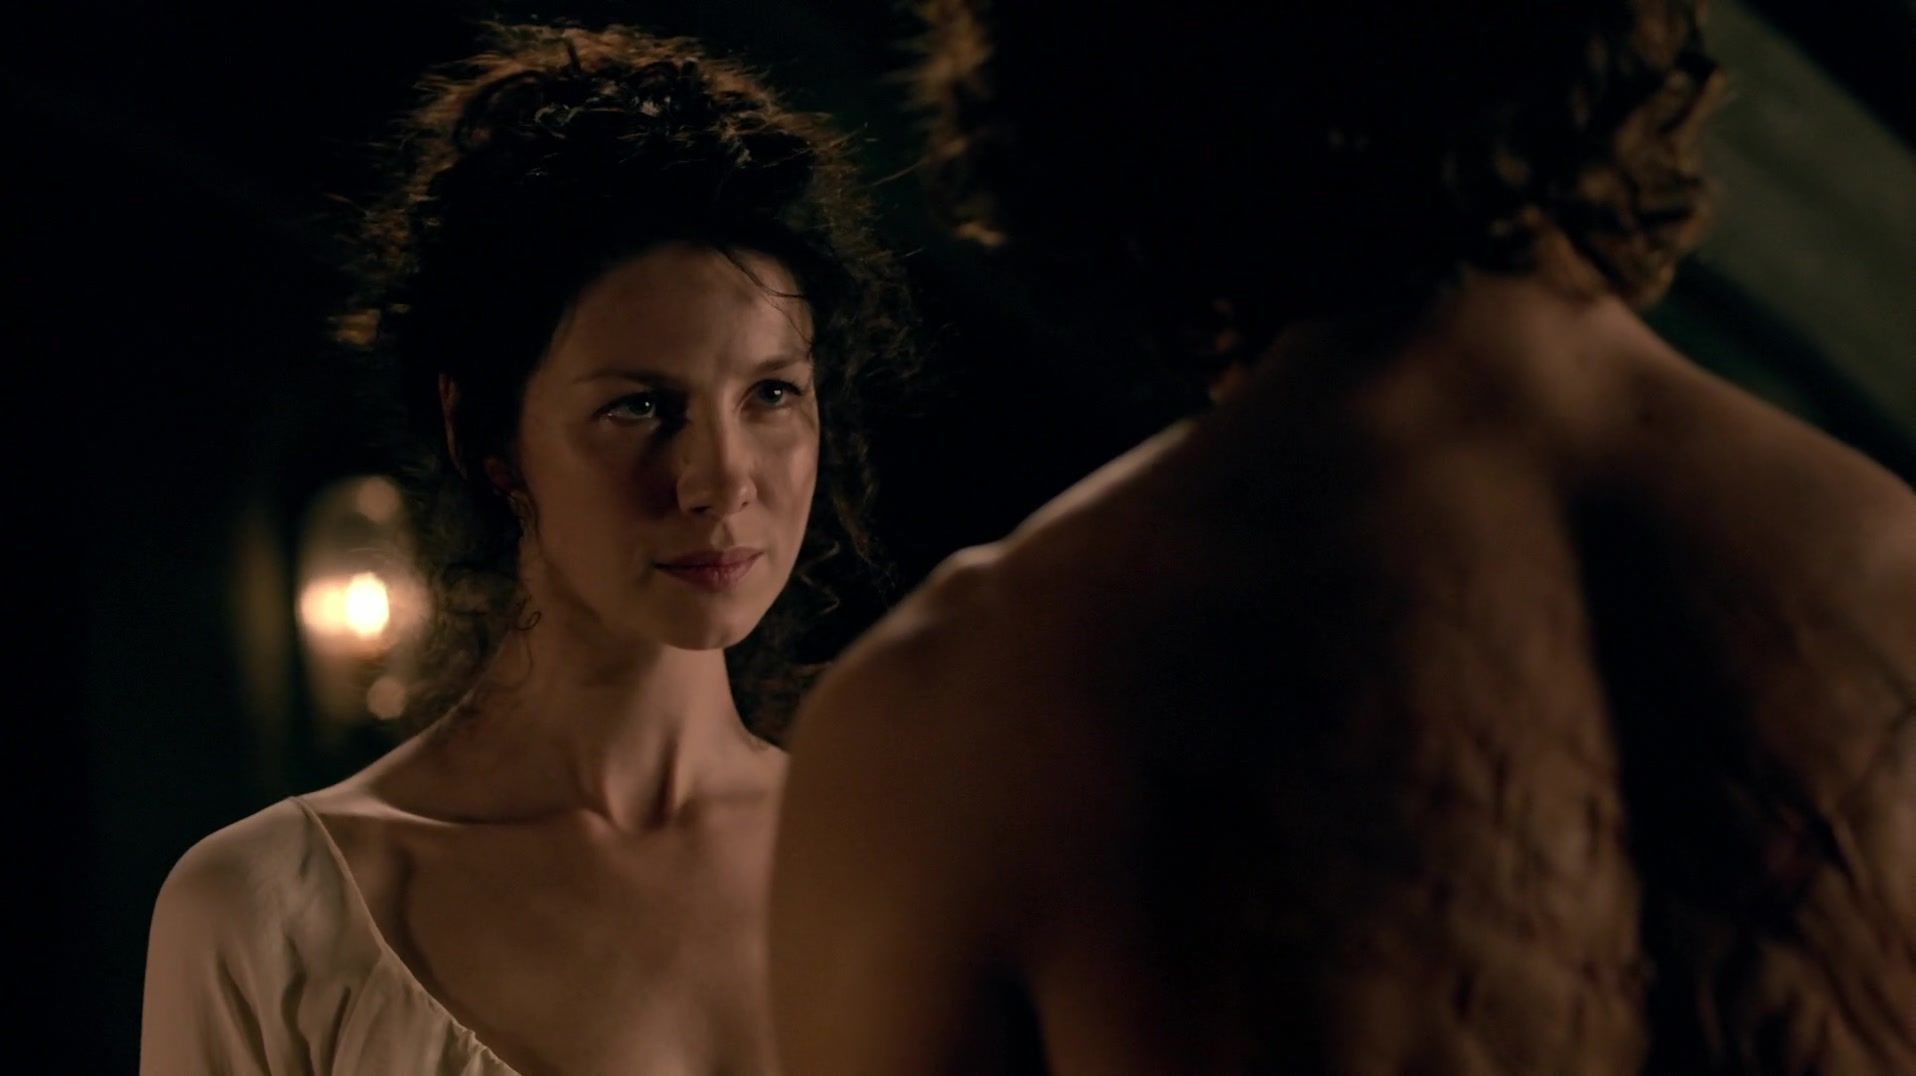 Gay Twinks Sex scene of naked Caitriona Balfe | TV show "Outlander" Cuminmouth